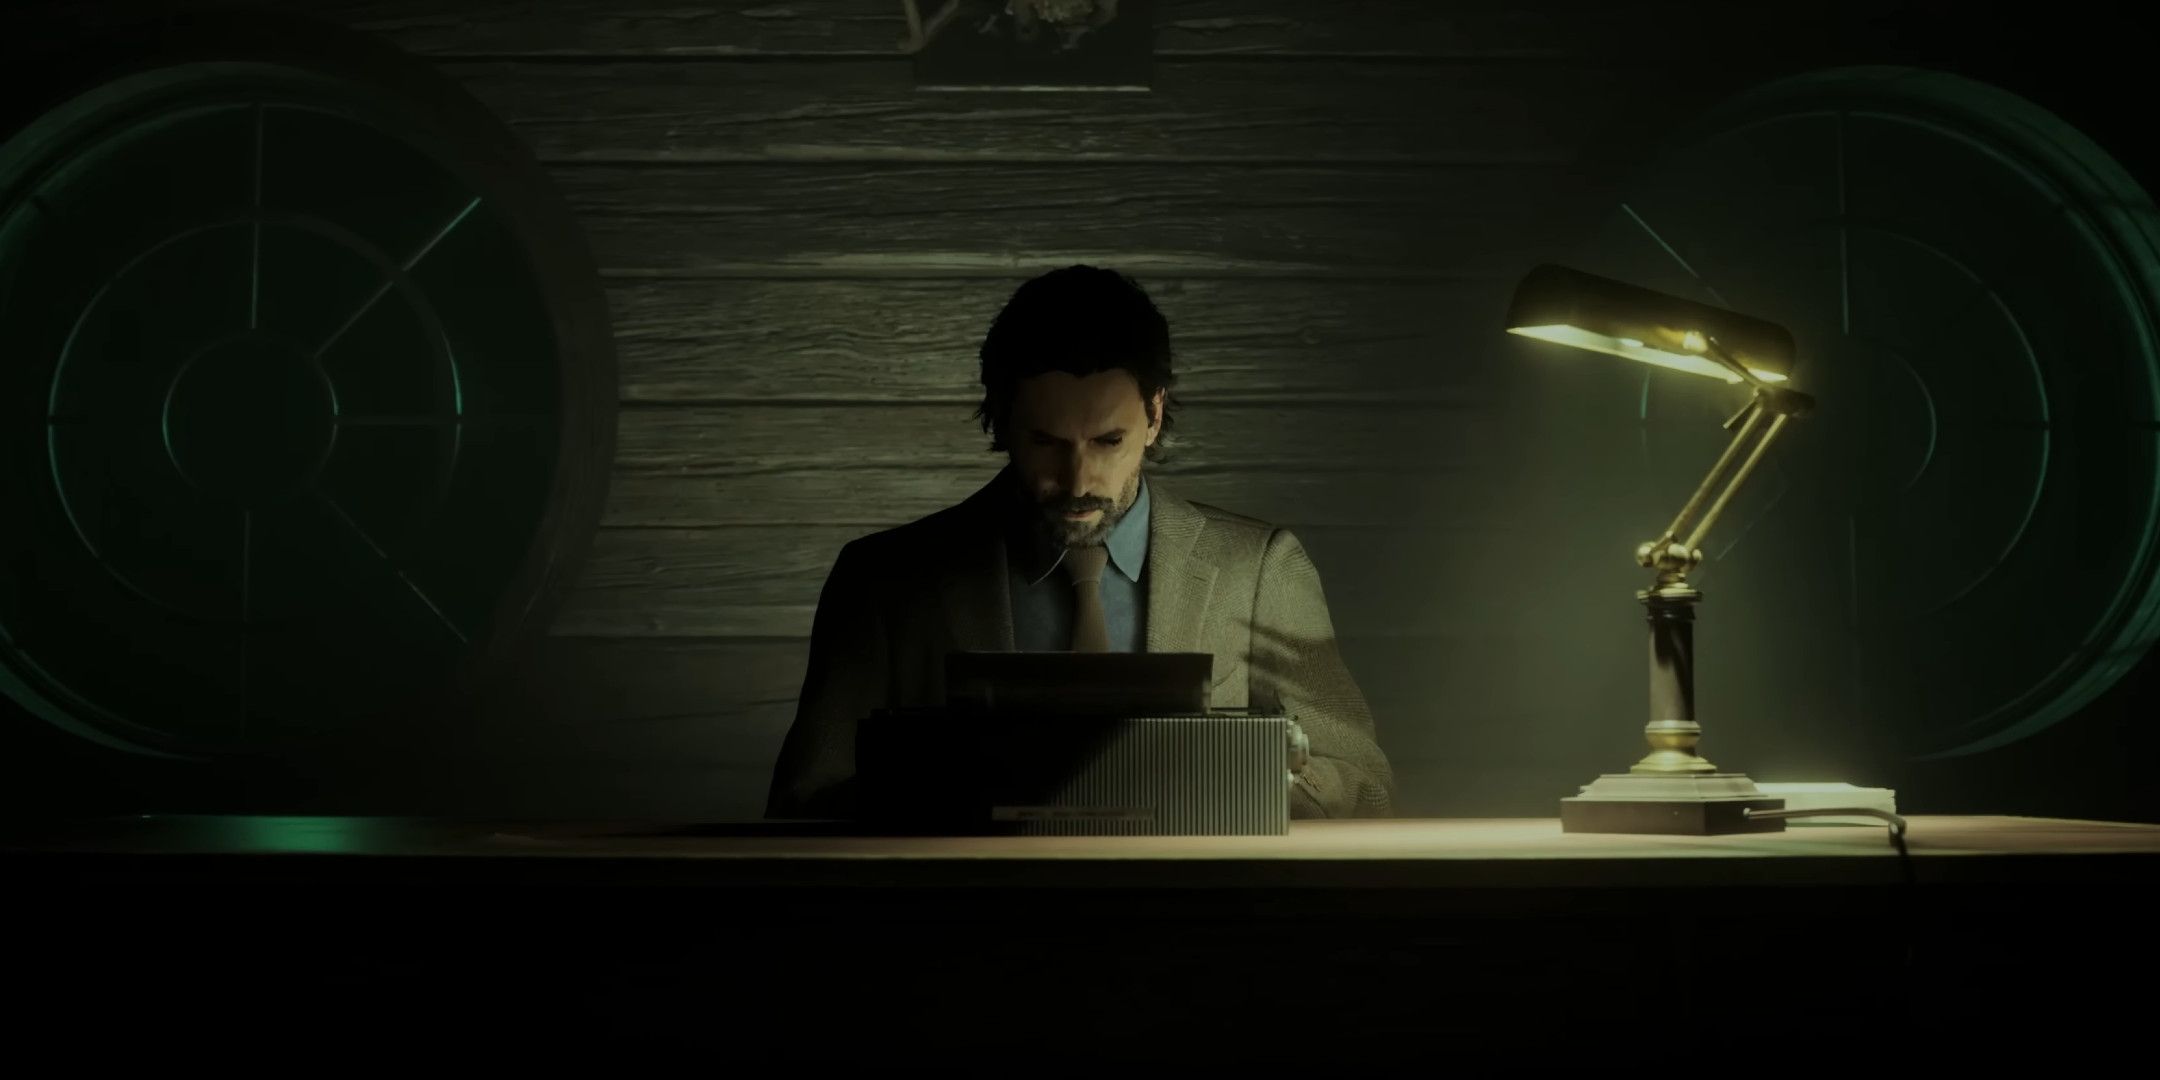 Alan Wake typing at a typewriter on a desk in a dark room